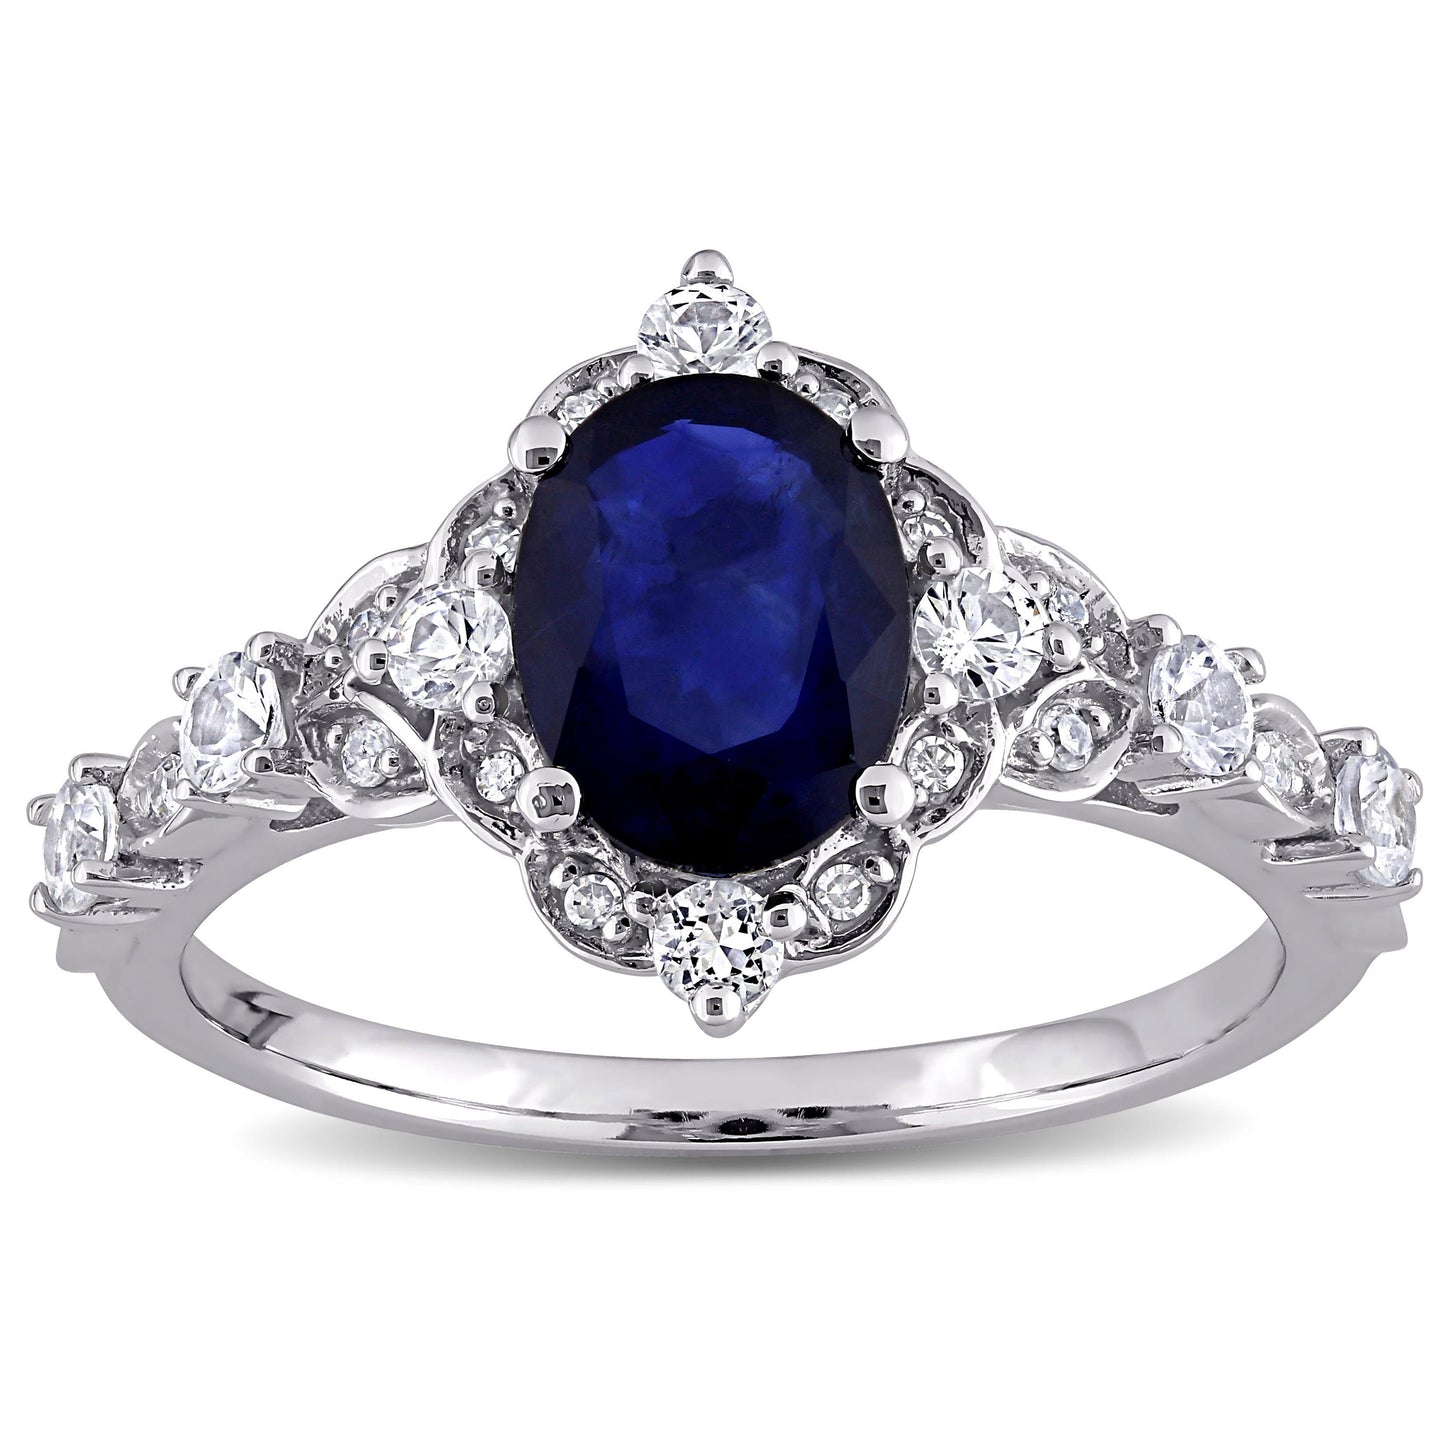 Blue & White Sapphire Vintage Ring With Diamonds